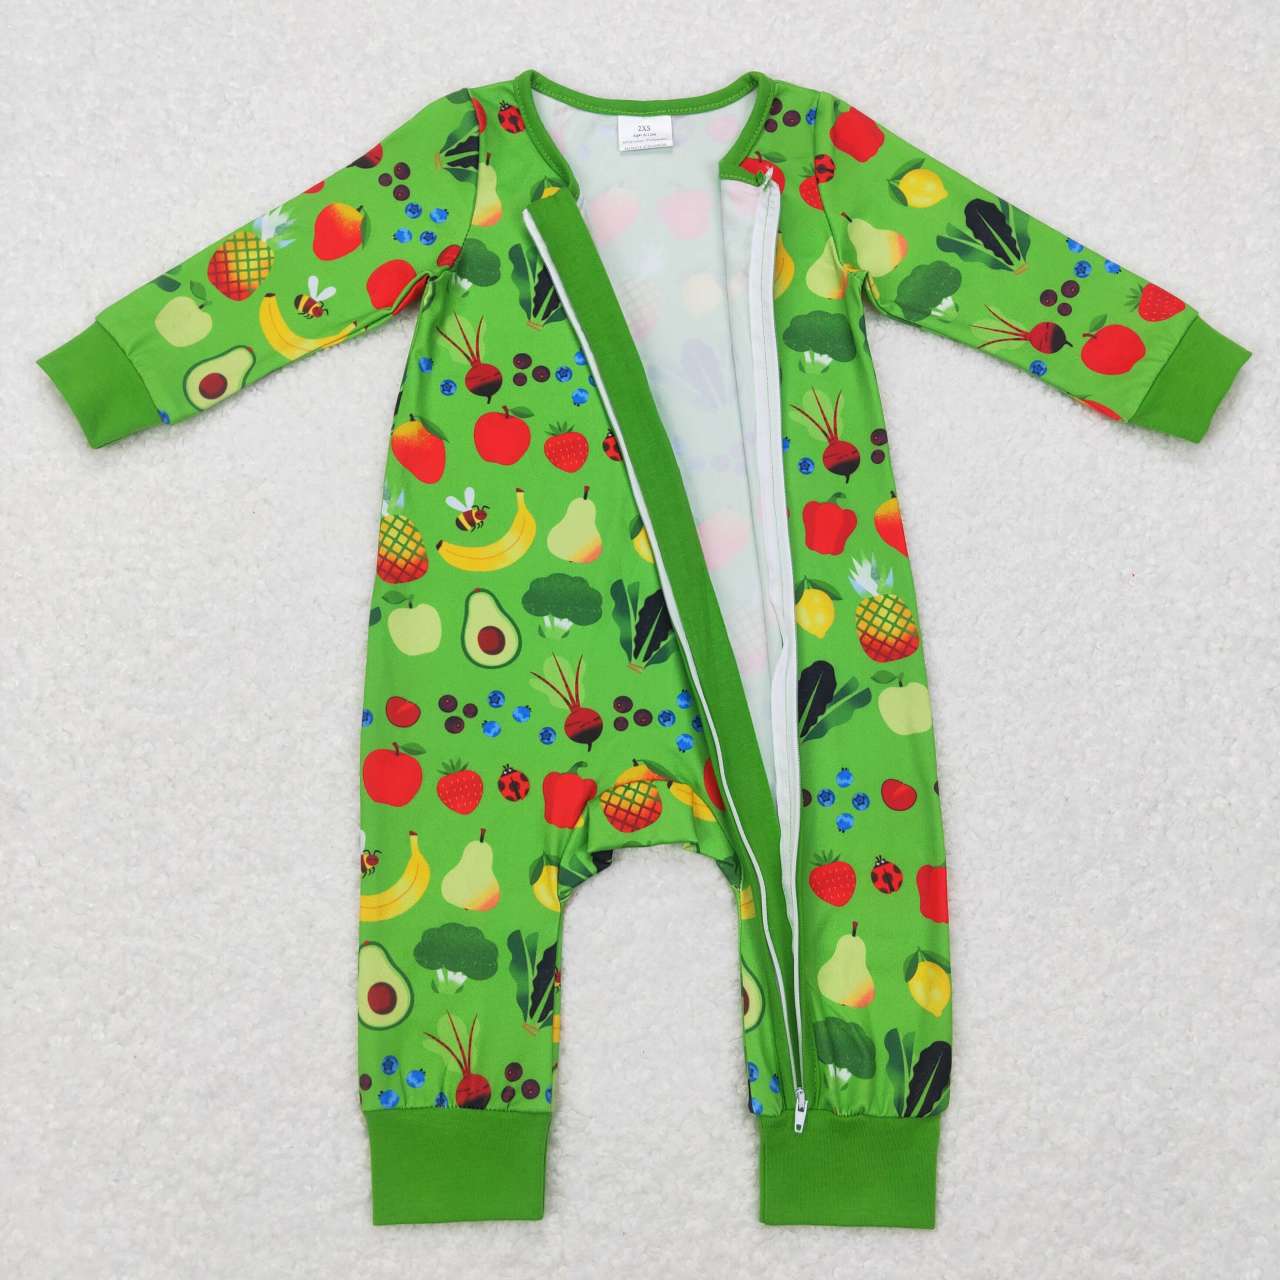 LR0781 Green zippered long-sleeved jumpsuit with vegetable and fruit patterns